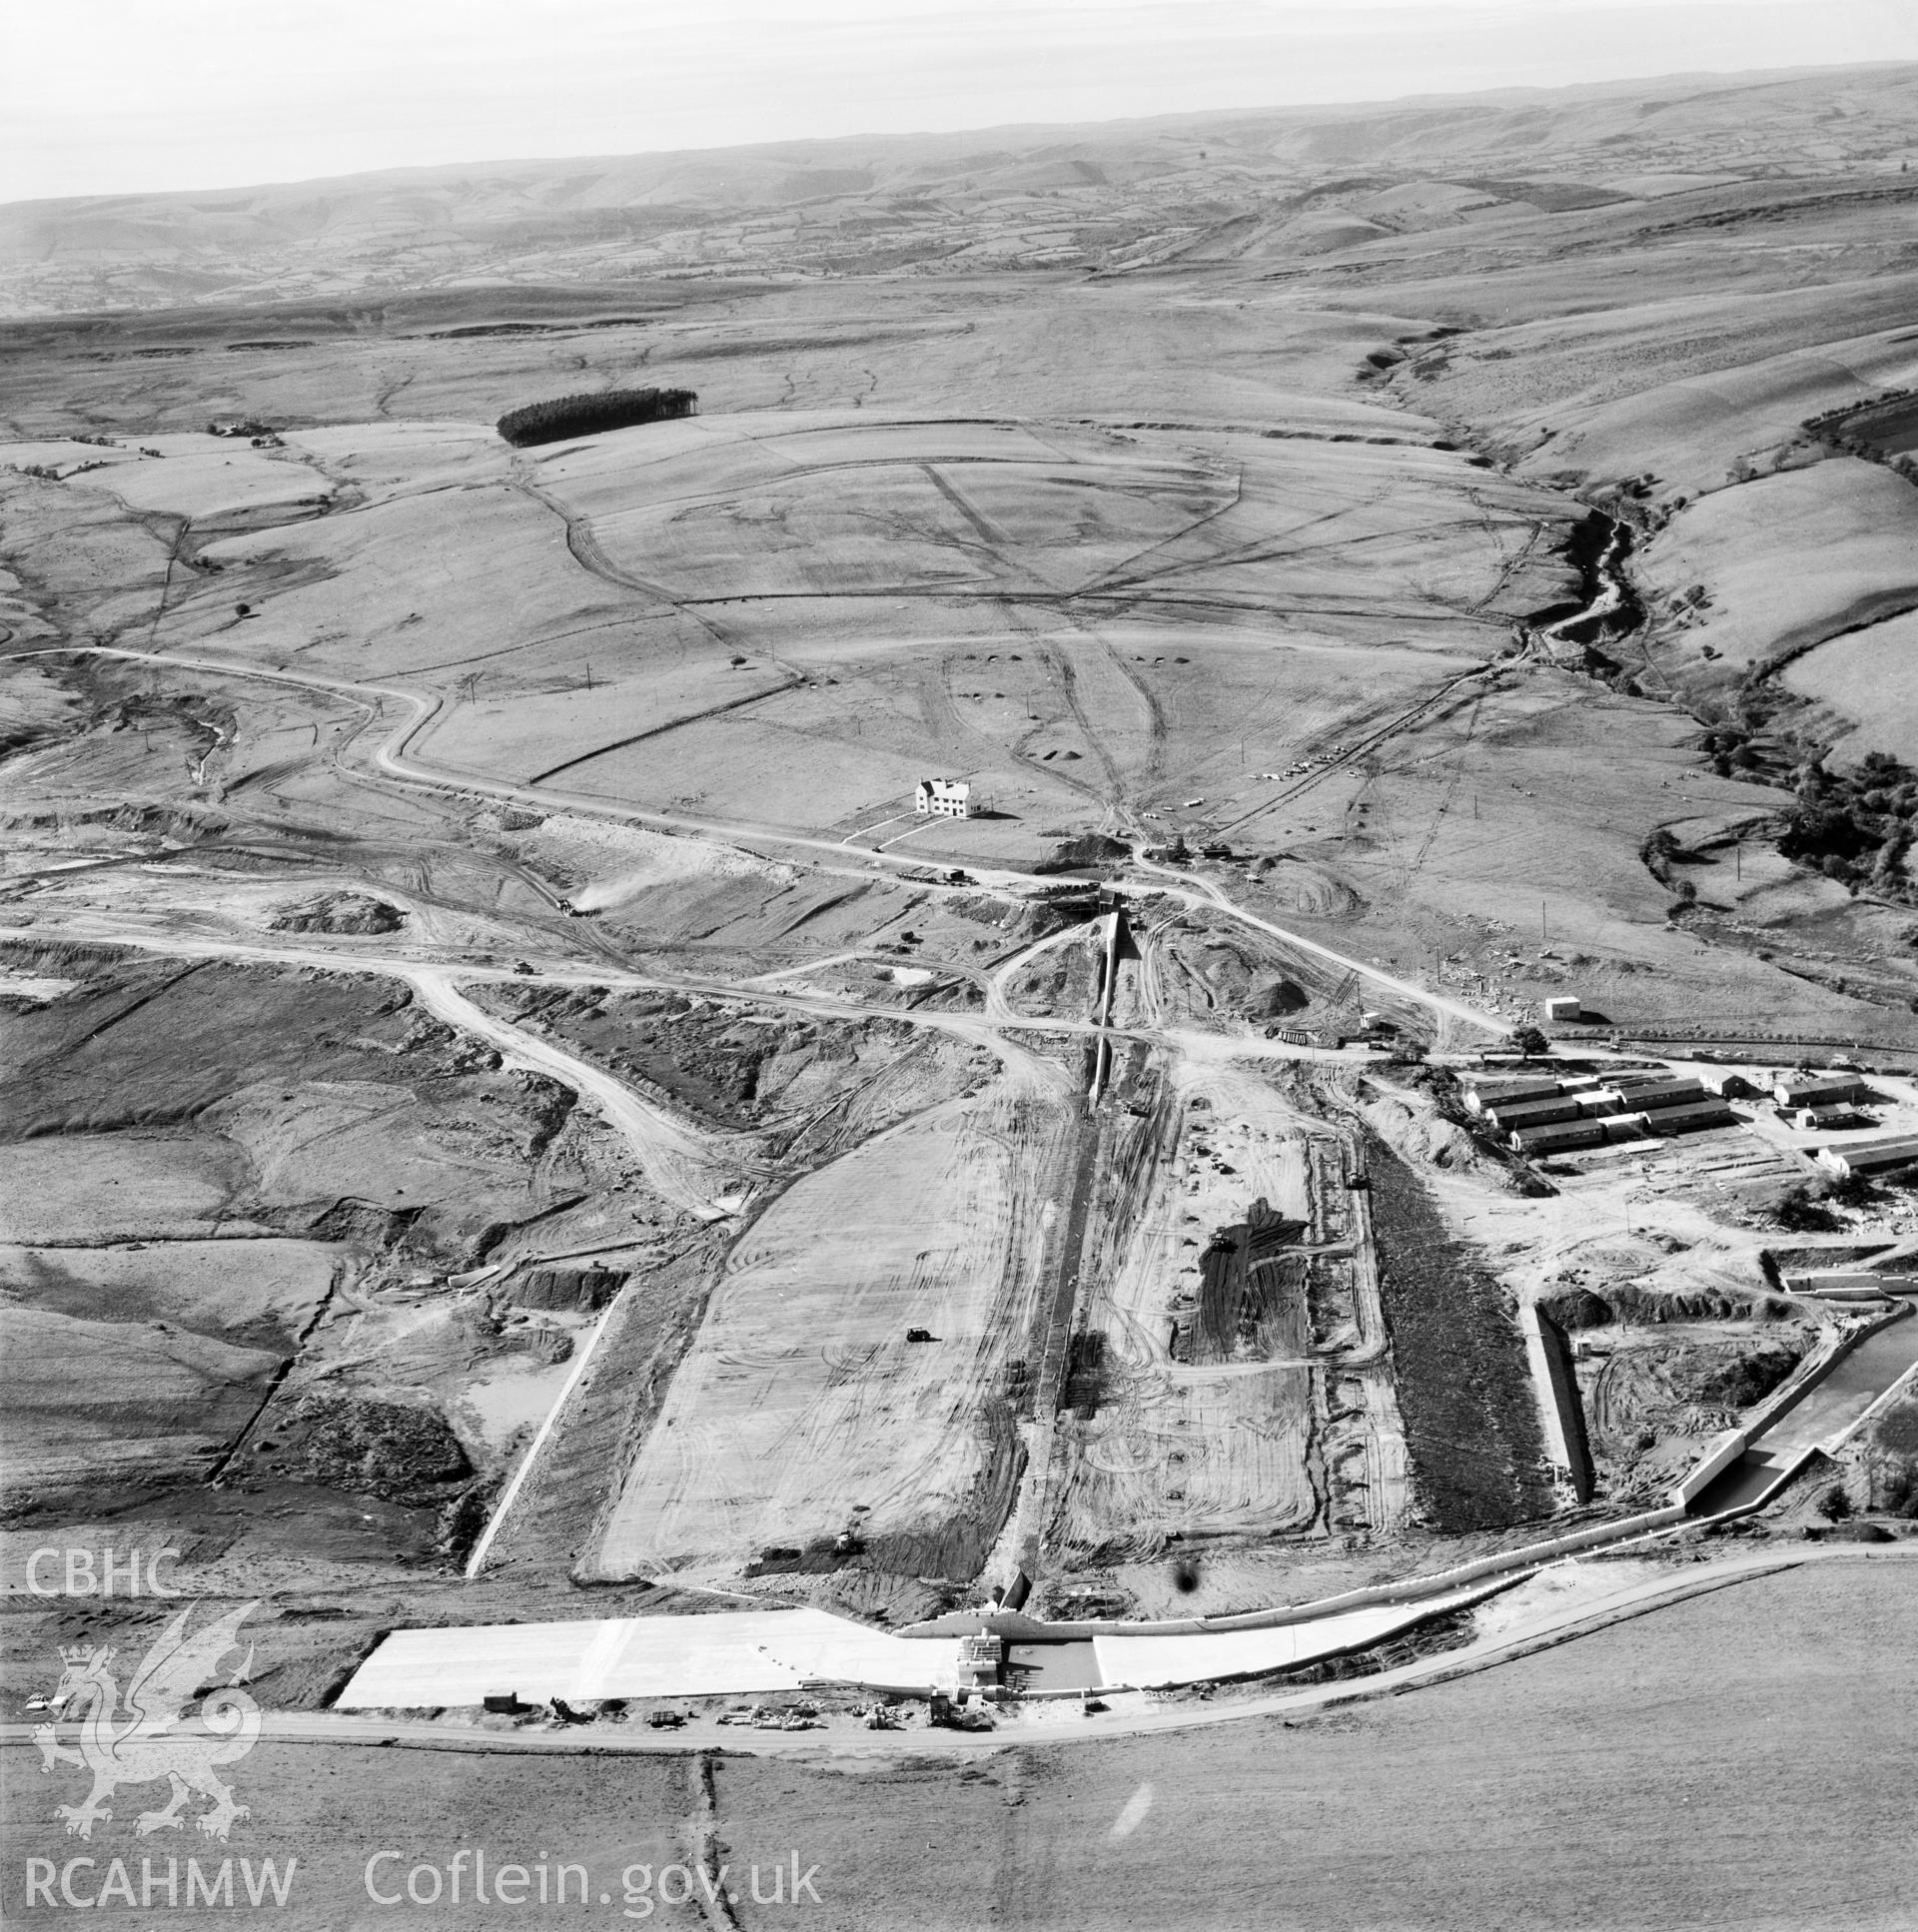 View showing construction of Usk reservoir, commissioned by County Borough of Swansea